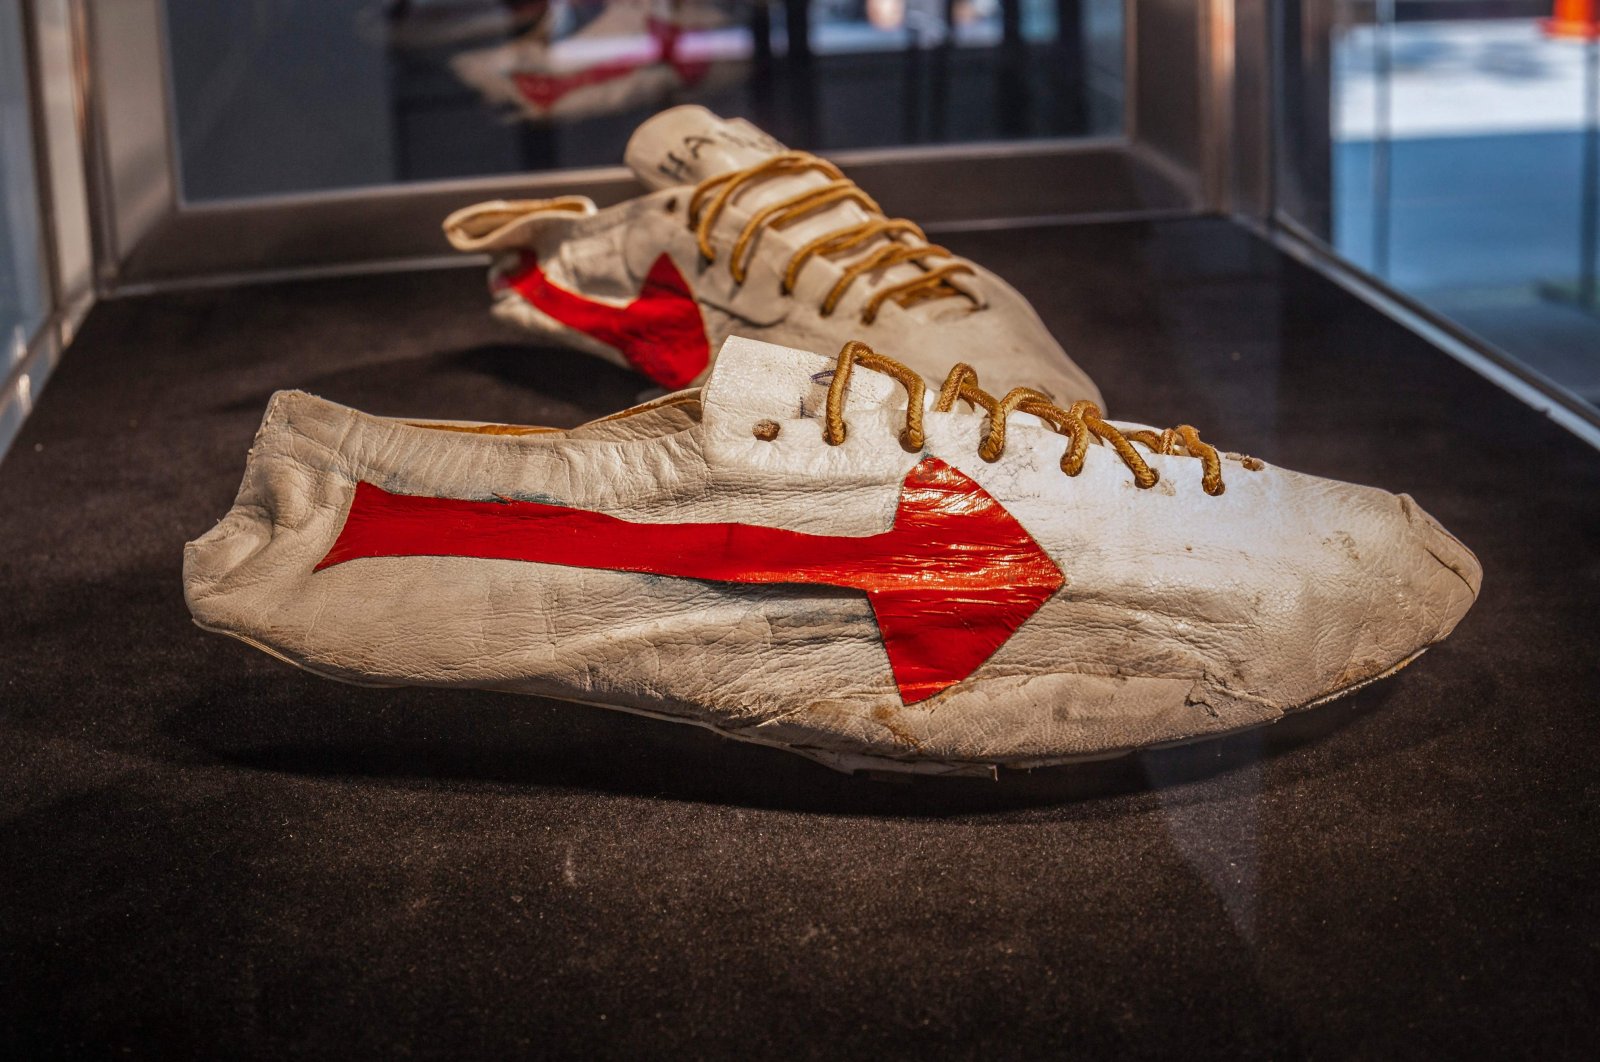 This handout photo released by Sotheby's shows a pair of "prototype logo" track spikes running shoes handmade by Nike co-founder Bill Bowerman for Canadian sprinter and Olympian Harry Jerome in the 1960s, New York, U.S., July 7, 2021. (Sotheby's/AFP Photo)